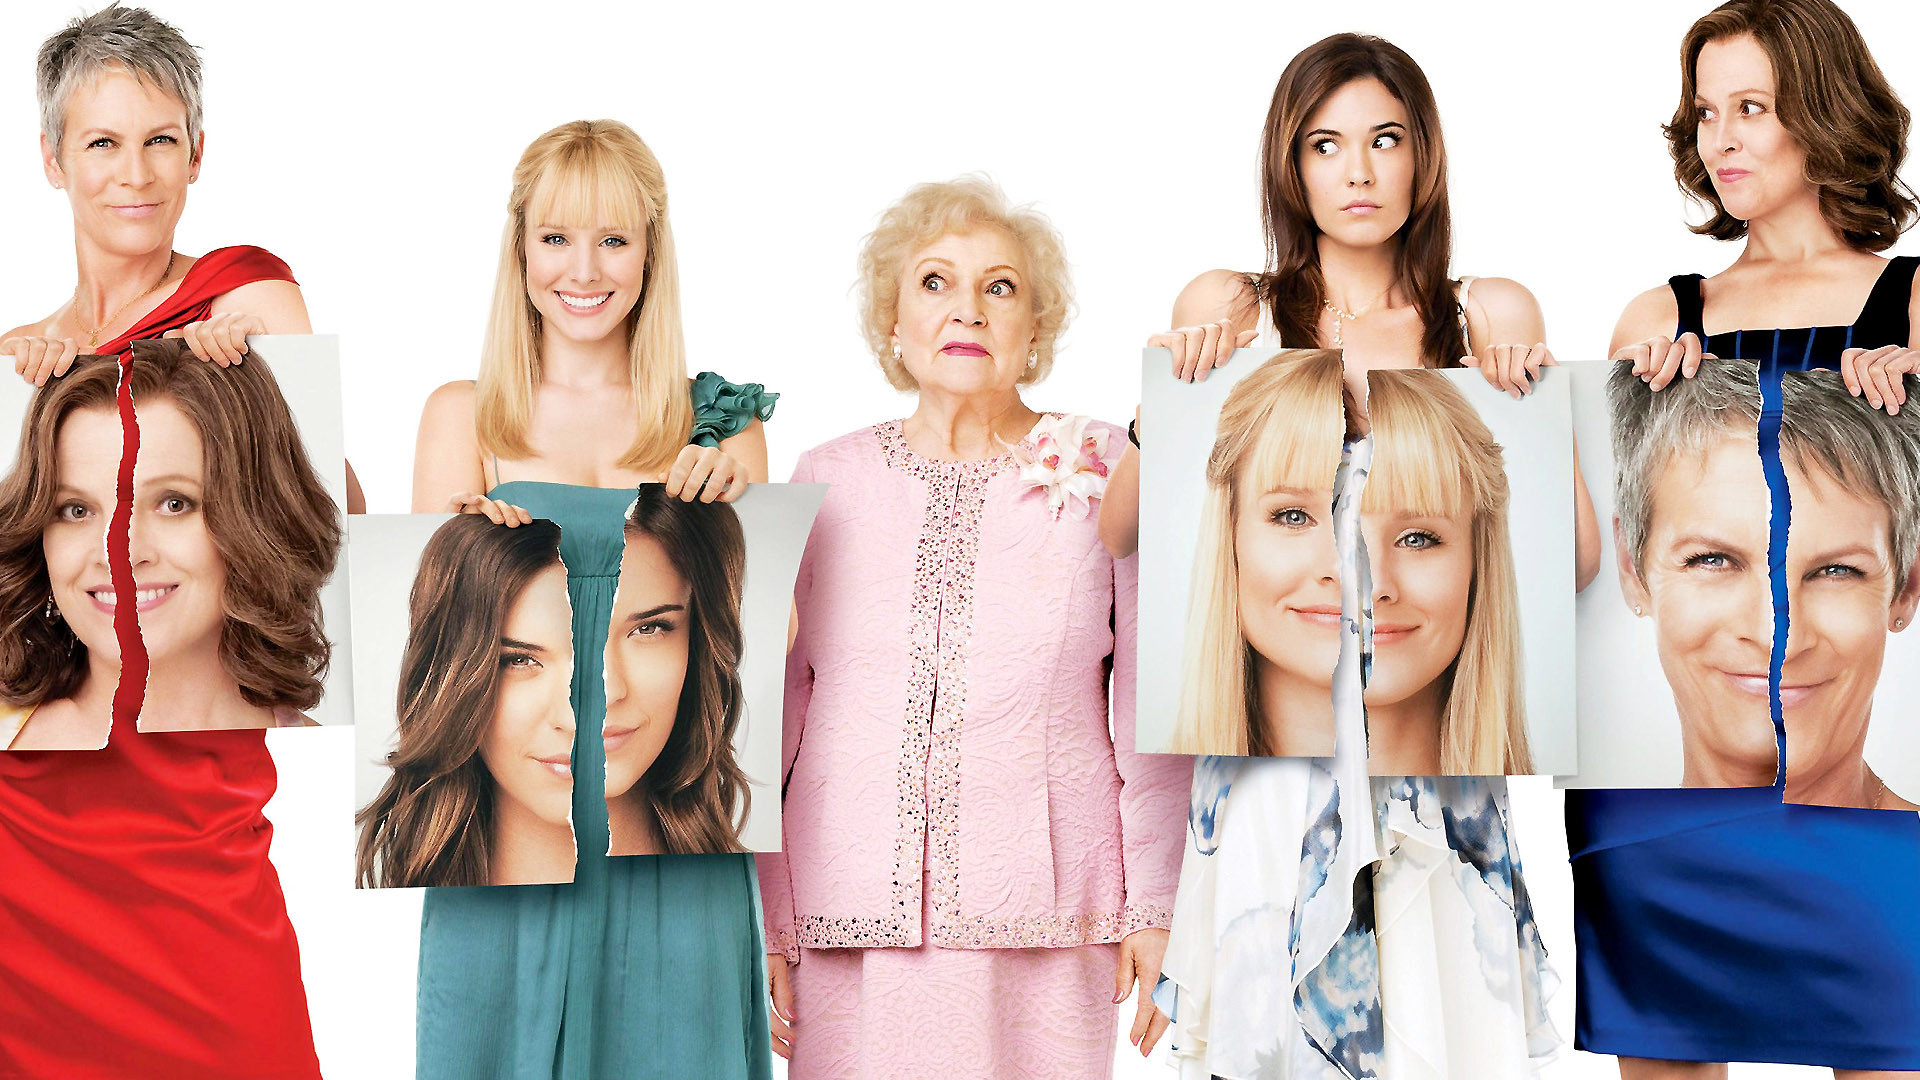 movie, you again, betty white, jamie lee curtis, kristen bell, odette annable, sigourney weaver lock screen backgrounds